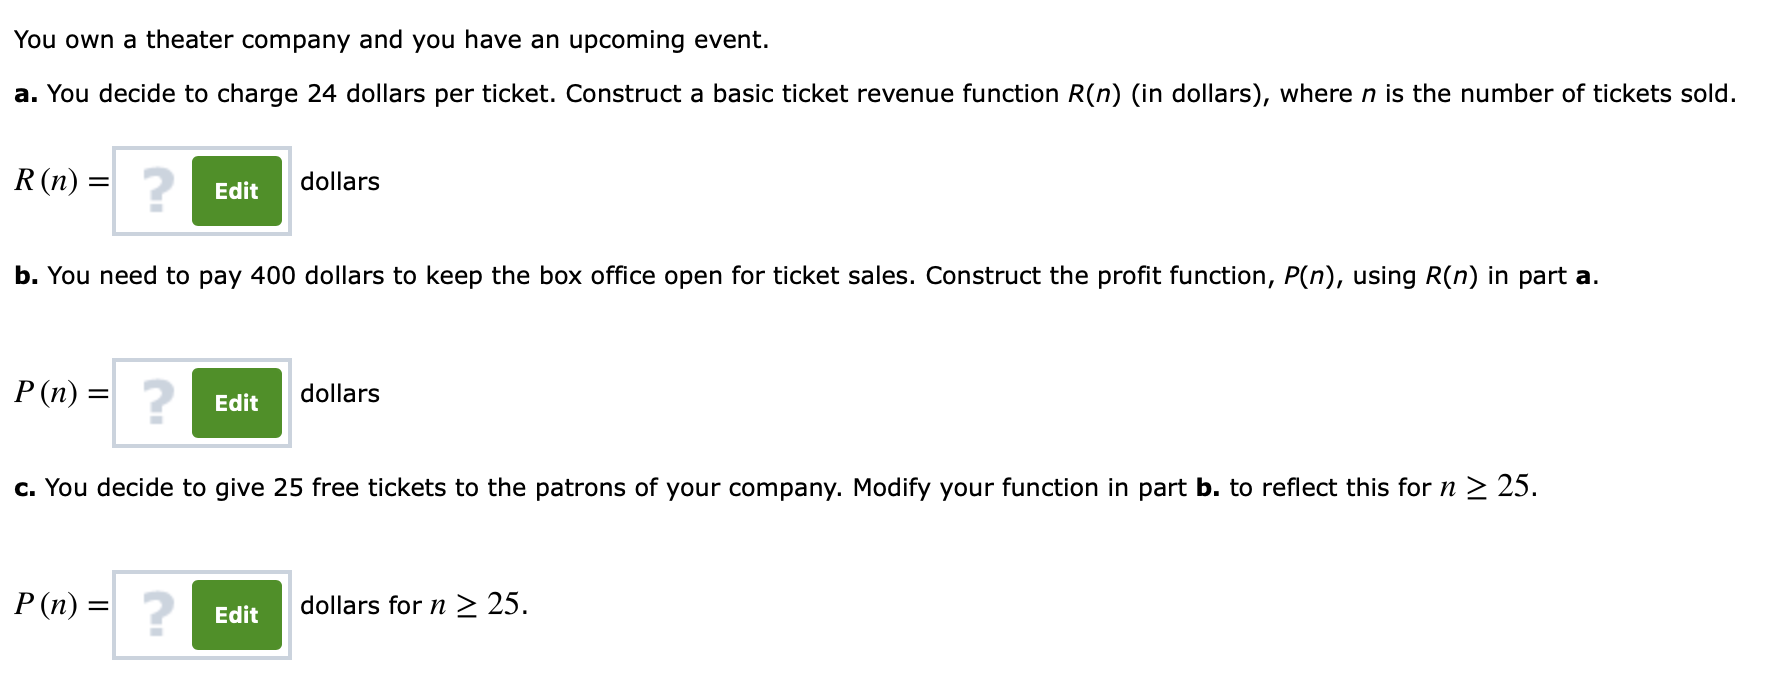 You own a theater company and you have an upcoming event.
a. You decide to charge 24 dollars per ticket. Construct a basic ticket revenue function R(n) (in dollars), where n is the number of tickets sold.
R (n) =
dollars
Edit
b. You need to pay 400 dollars to keep the box office open for ticket sales. Construct the profit function, P(n), using R(n) in part a.
2
P (n) =
dollars
Edit
c. You decide to give 25 free tickets to the patrons of your company. Modify your function in part b. to reflect this for n 2 25
dollars for n 2 25
Edit
